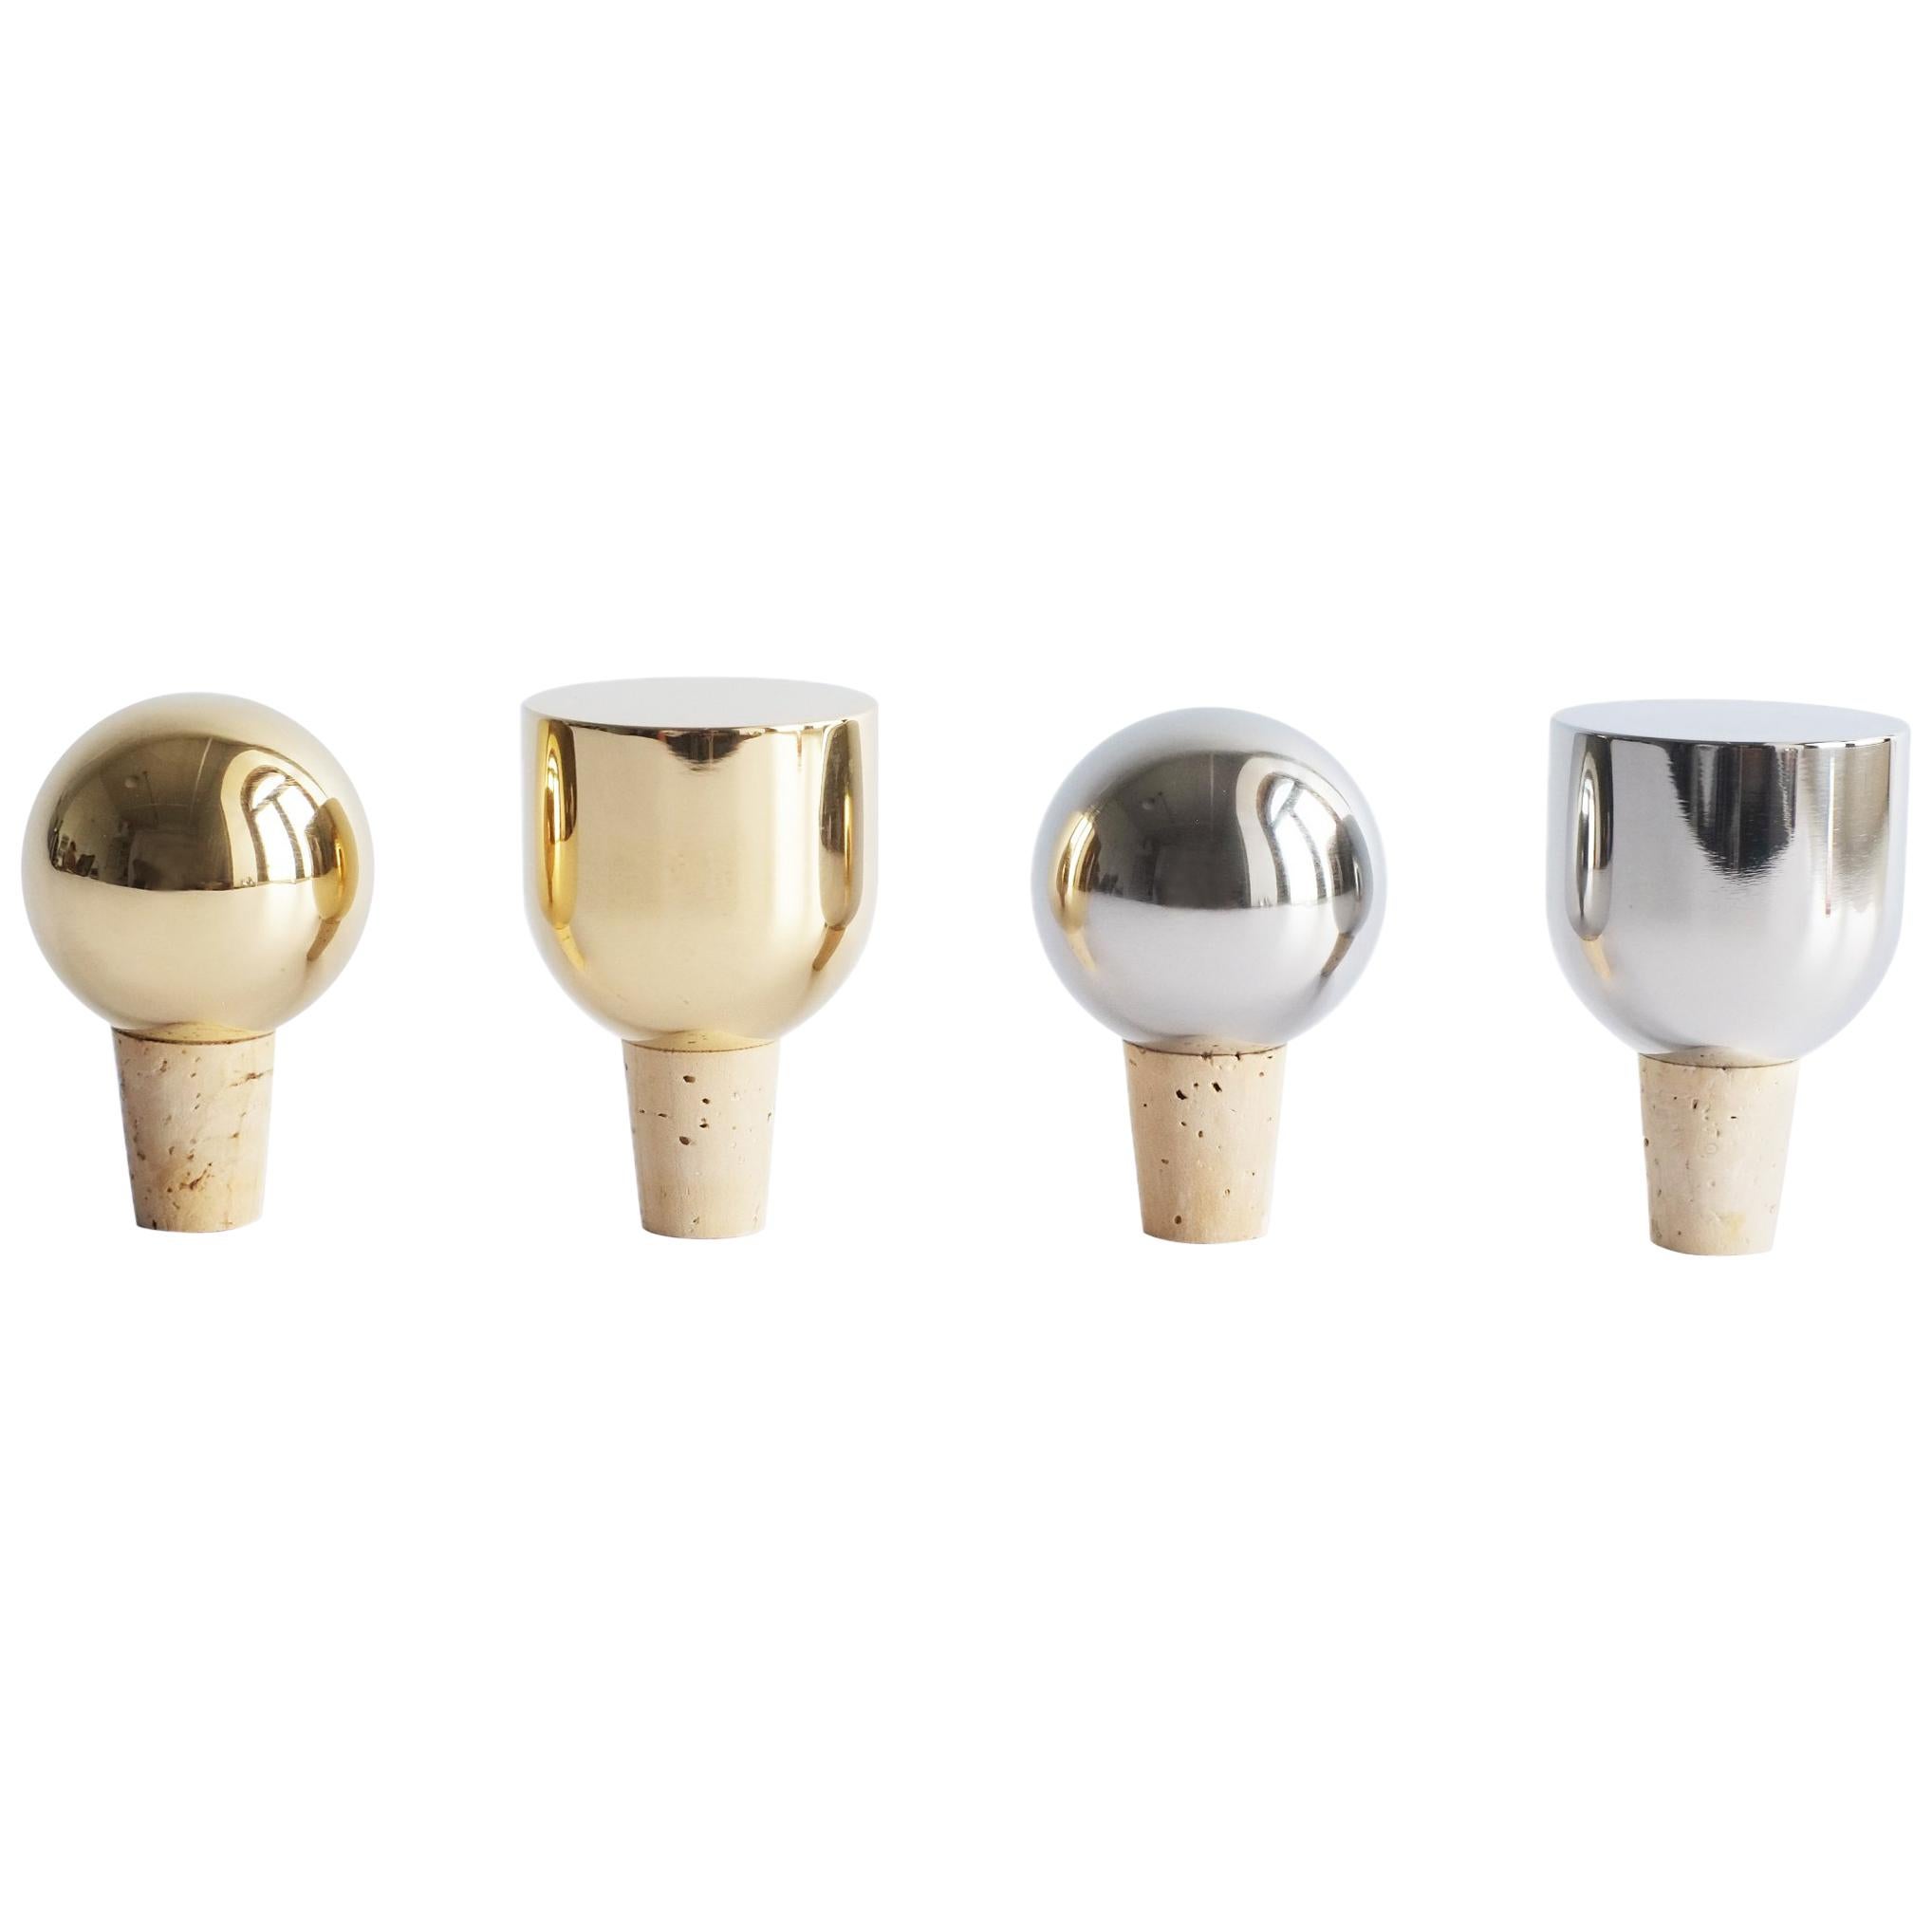 Contemporary Brass and Steel Mass Wine Stoppers by Fort Standard, in Stock